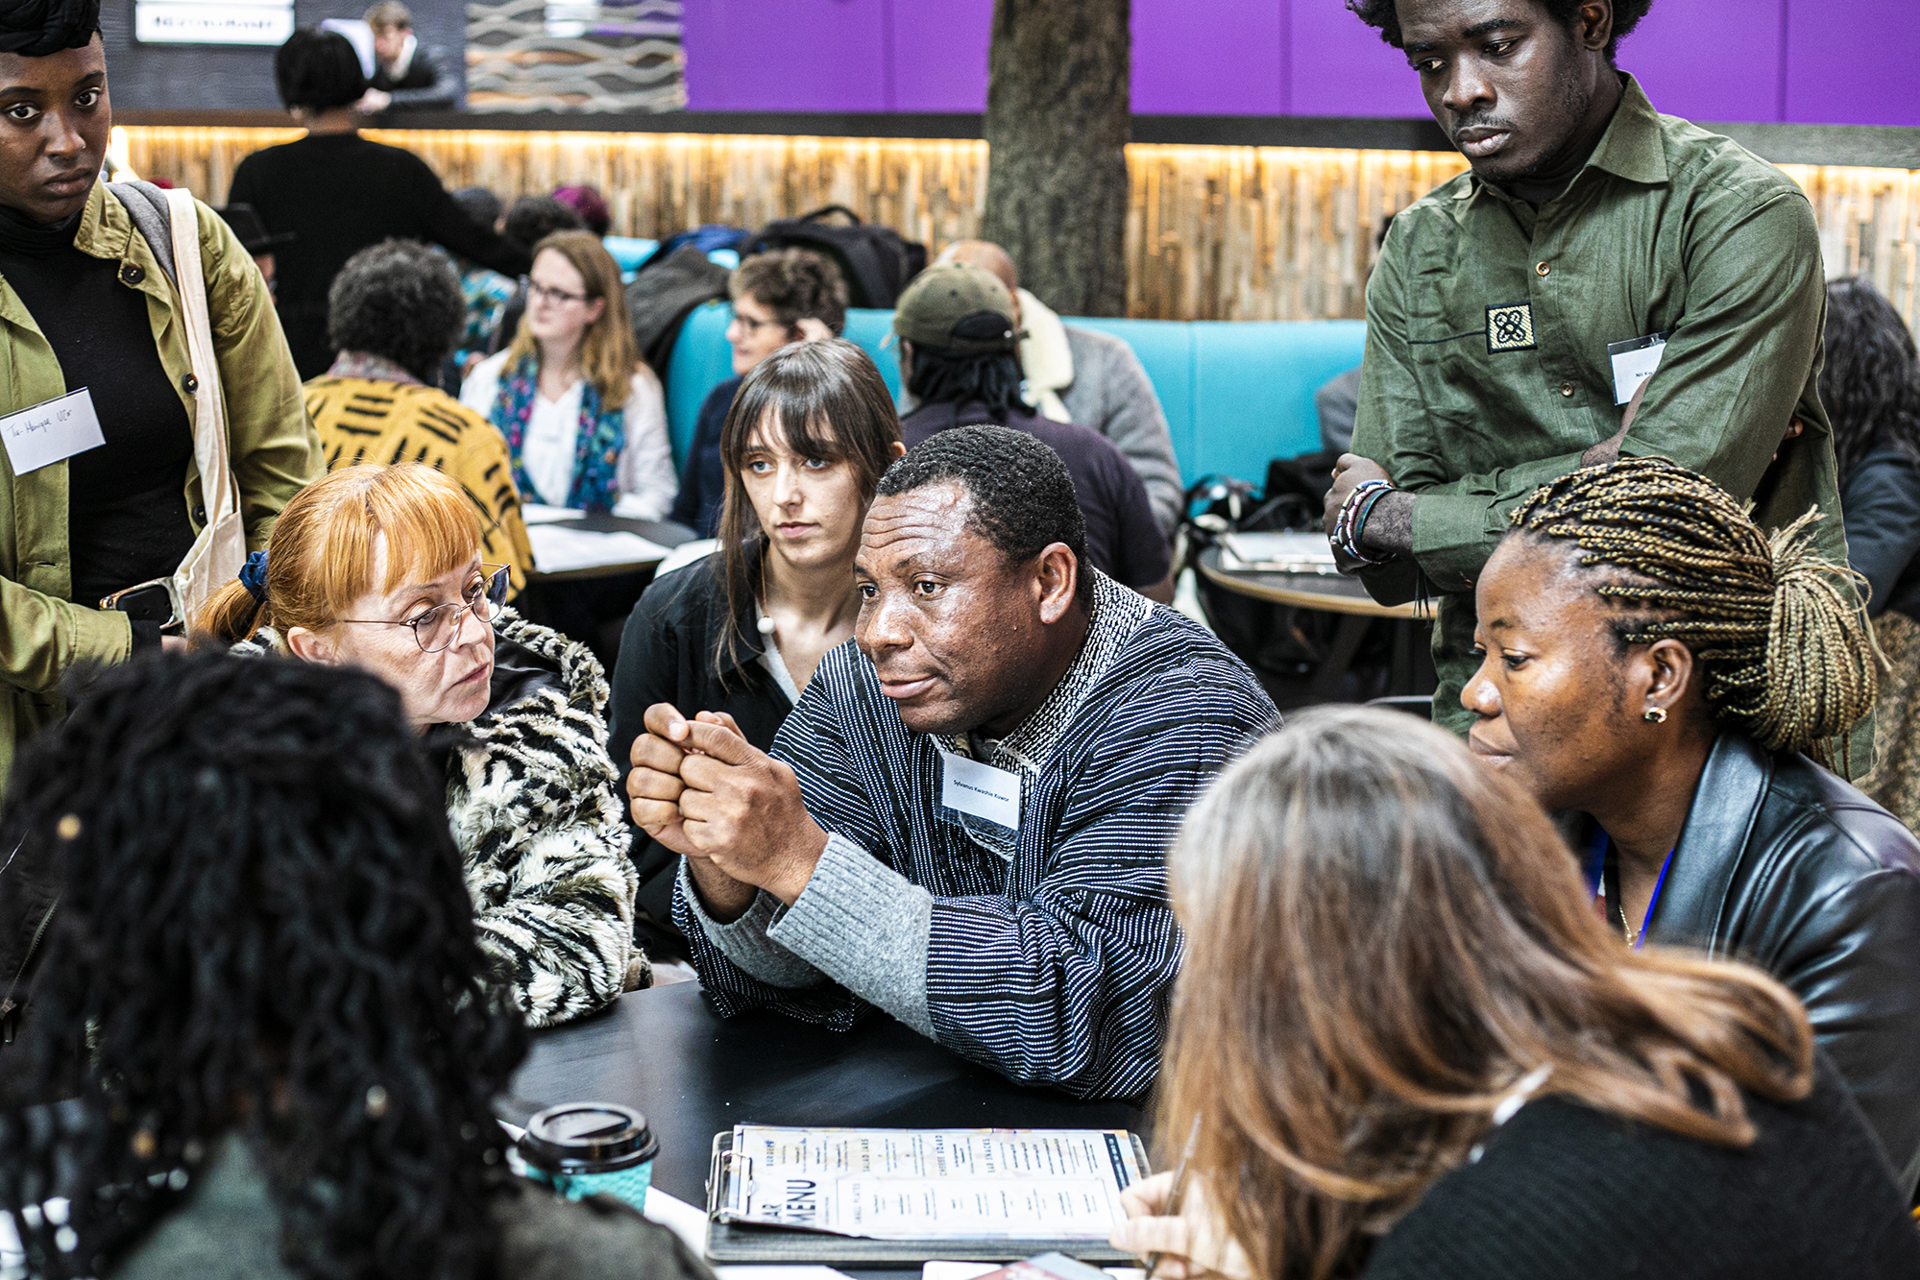 Global majority male in the centre of the image sitting at a table holding his hands together with a group of people listening to him of mixed ages, genders and ethnicities.  